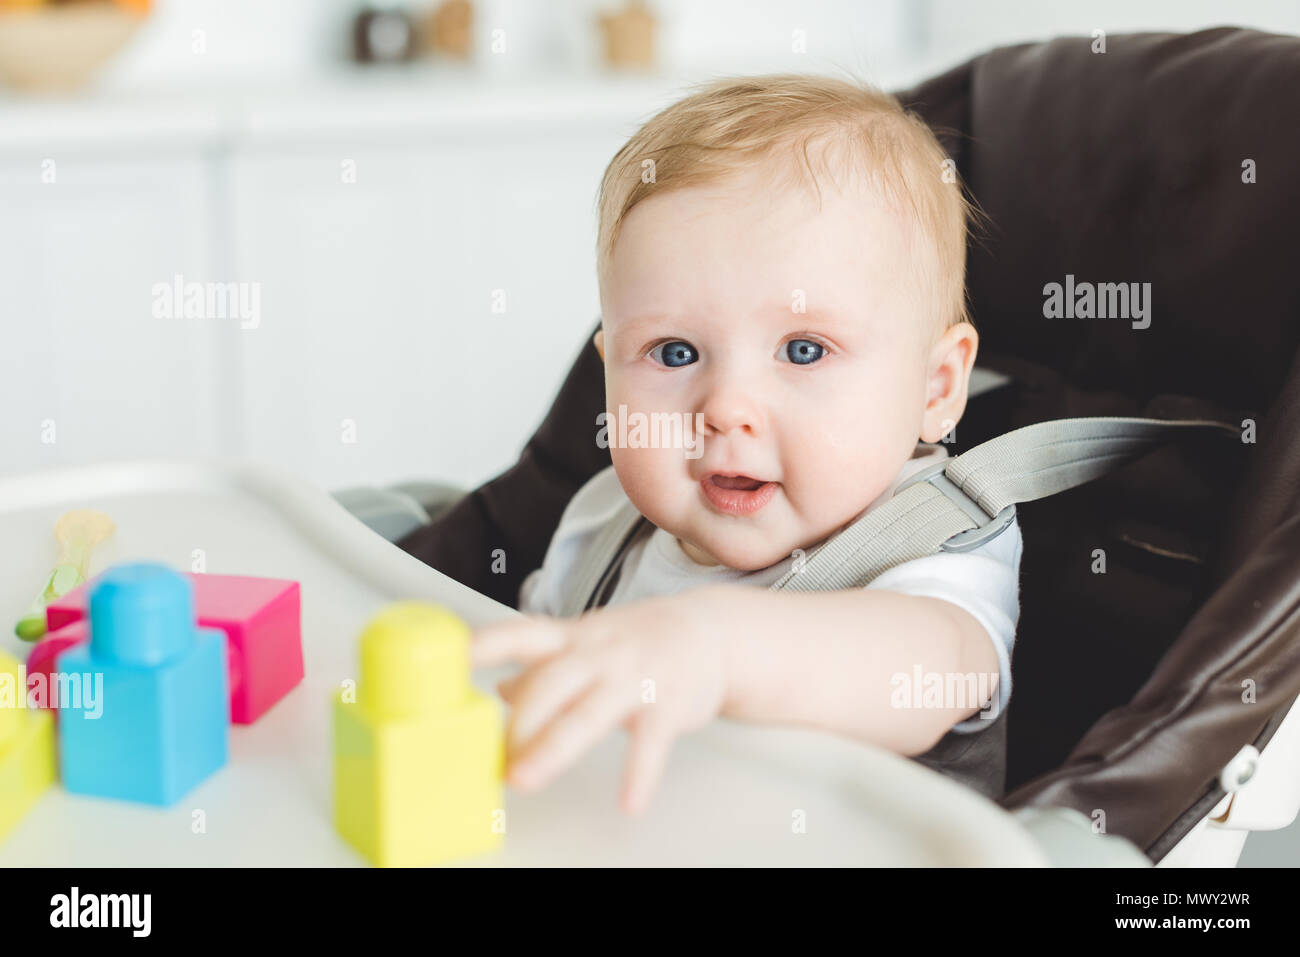 Smiling infant sitting in baby chair and playing with plastic blocks Stock Photo